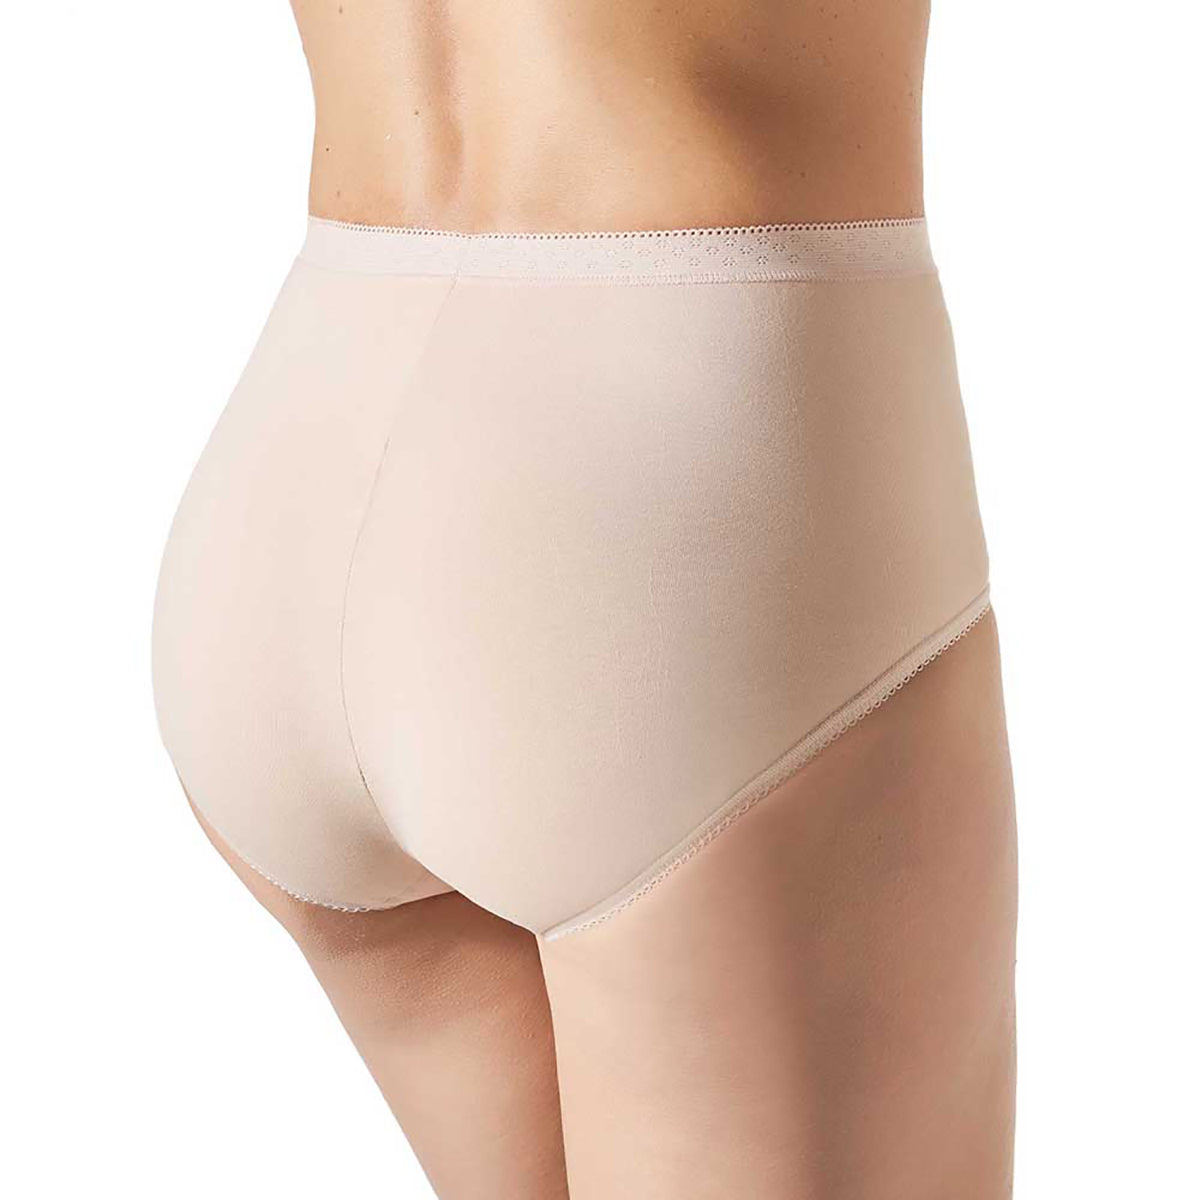 3-Pack of Brazilian briefs with lace trim - Underwear - CLOTHING - Woman 